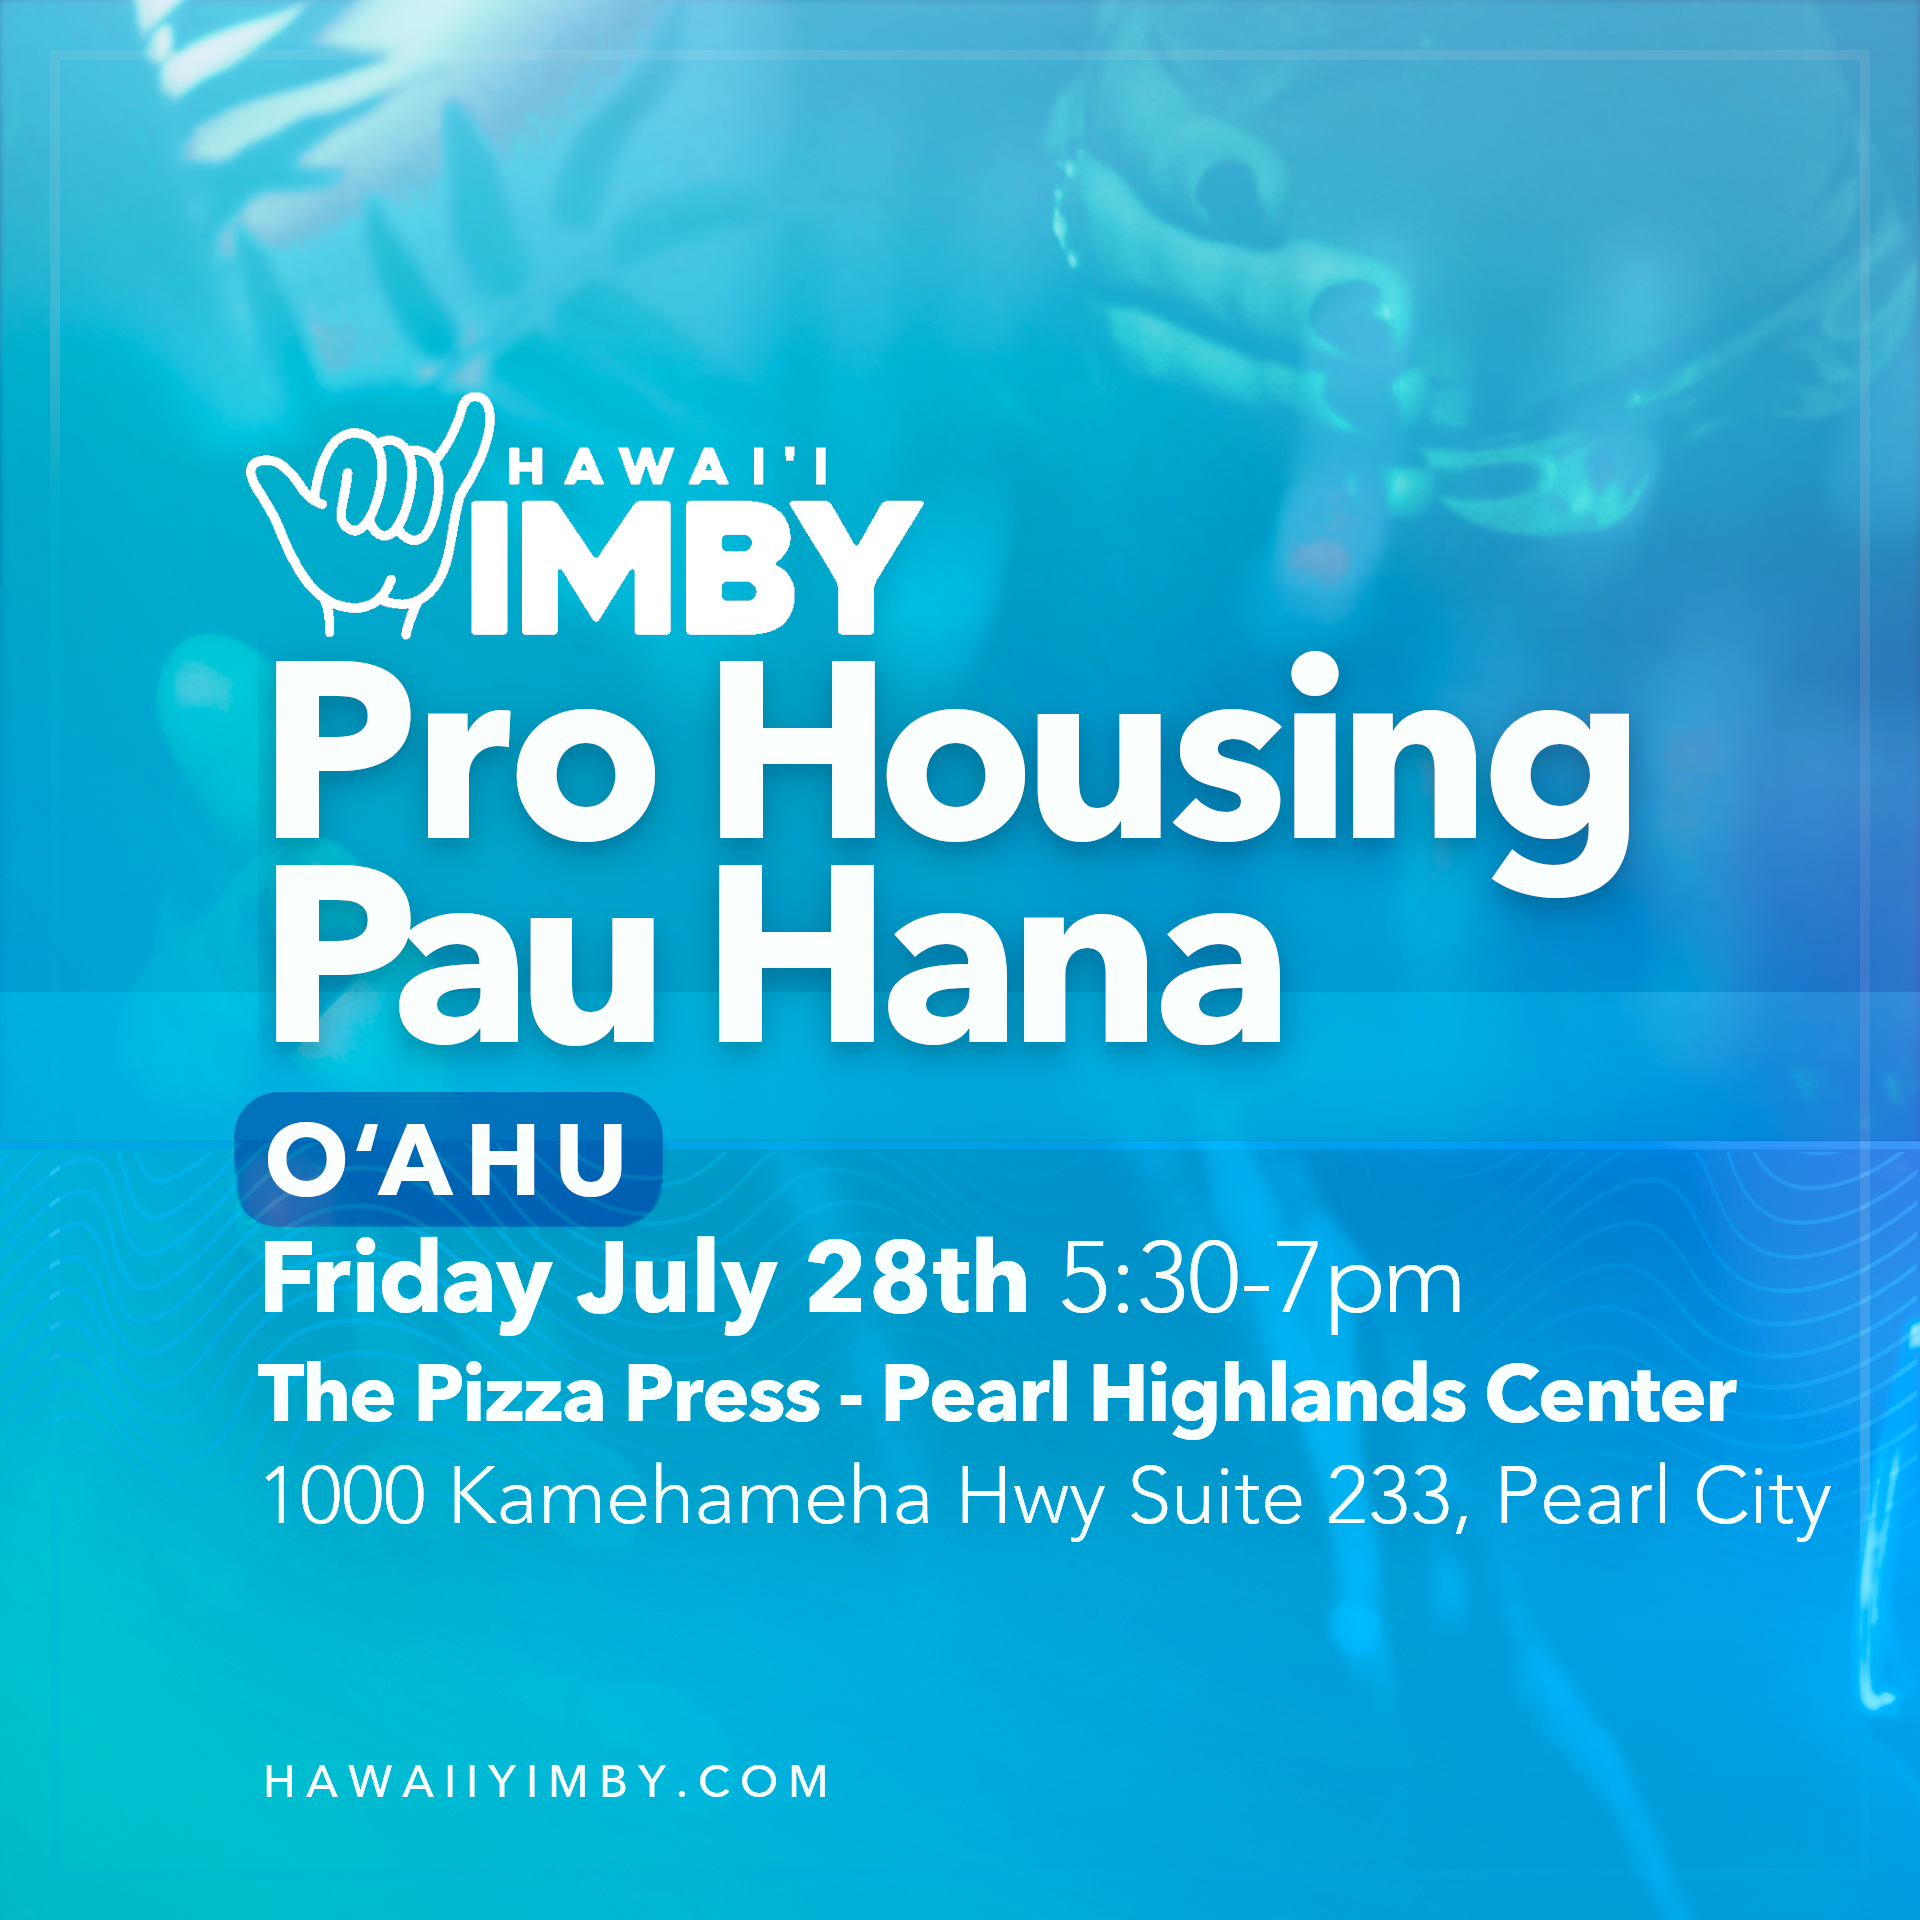 Hawaii YIMBY Pro Housing Pau Hana Oahu, Friday July 28th 5:30-7pm, The Pizza Press - Pearl Highlands Center, 1000 Kamehameha Hwy Suite 233, Pearl City